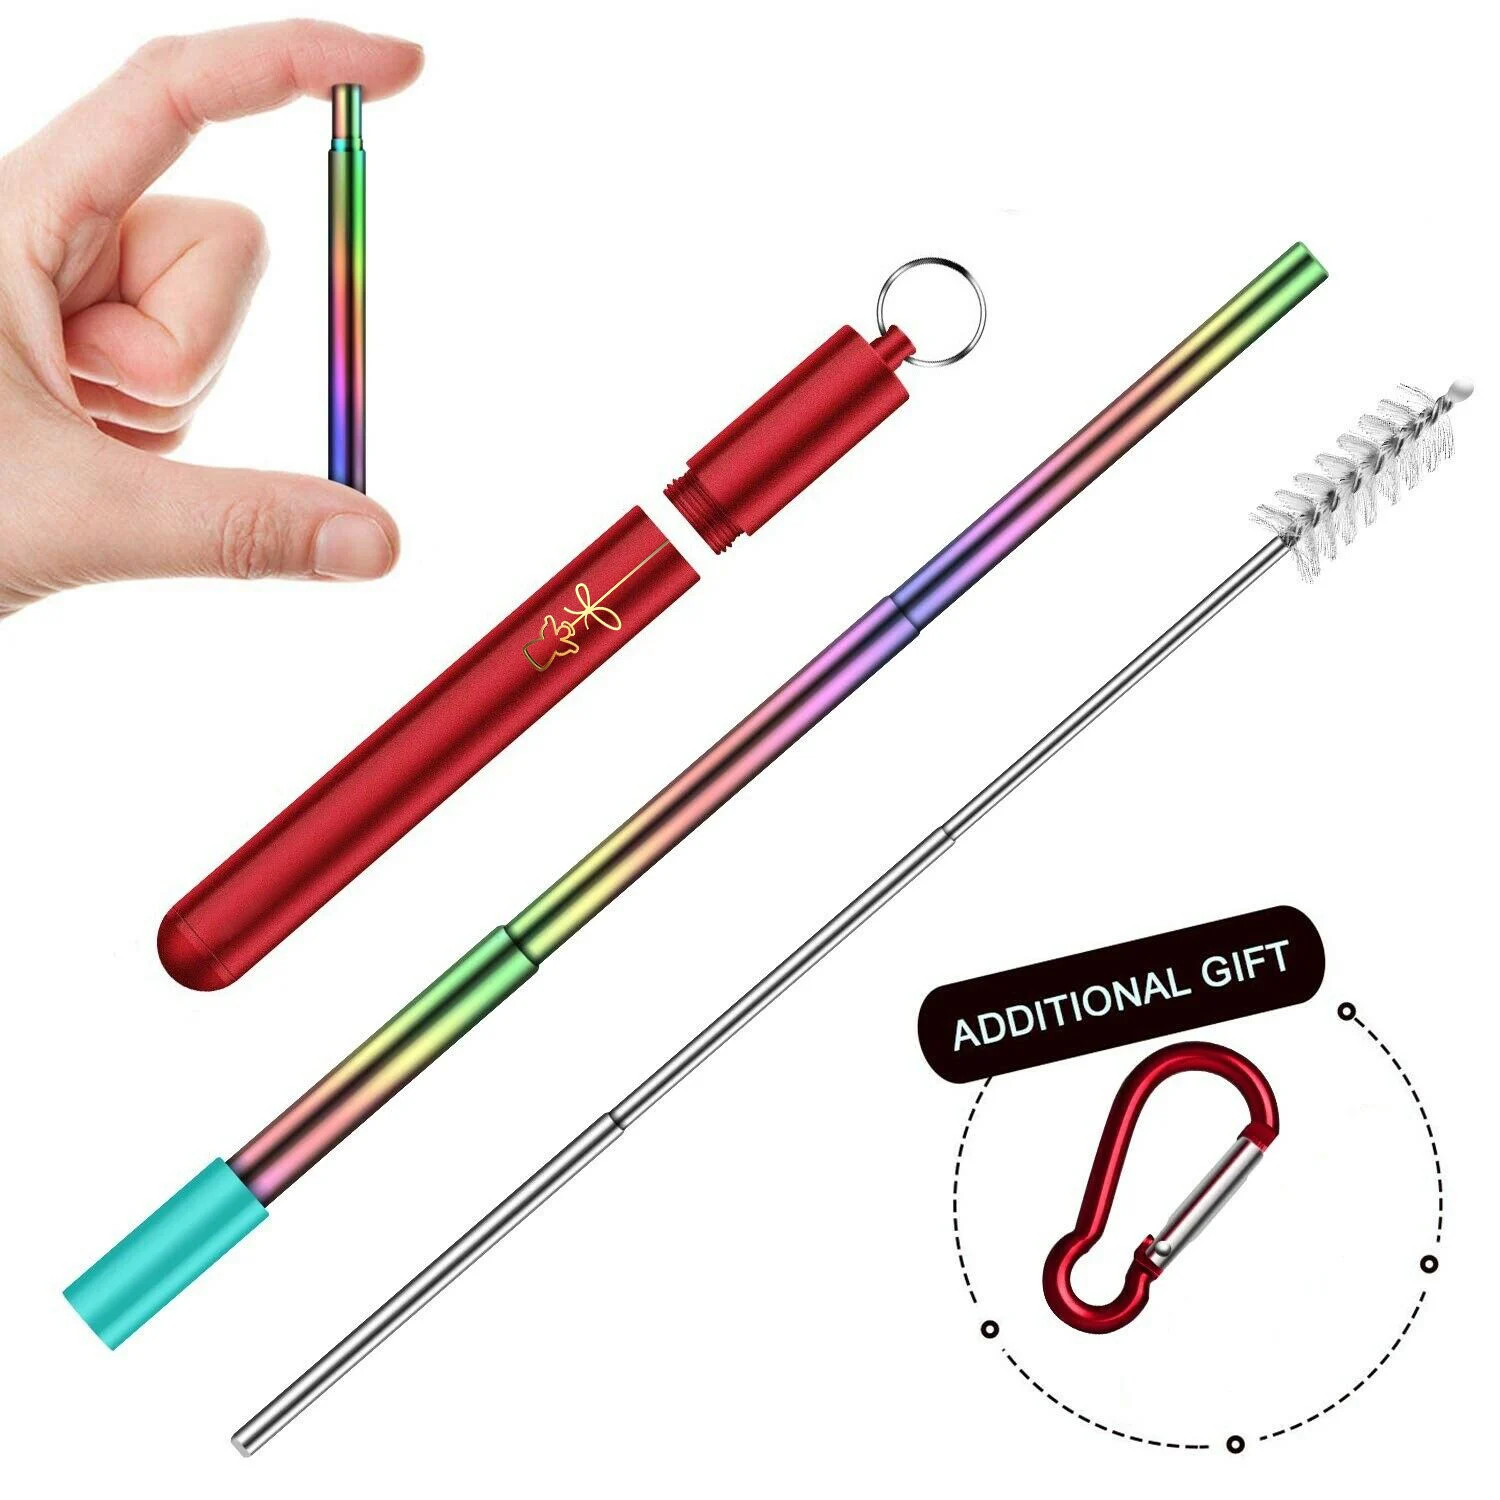 

Christmas Telescopic Reusable everich Approved Stainless Steel Collapsible Foldable Metal Straws Set Folding Drinking Straw, Steel color or customized color